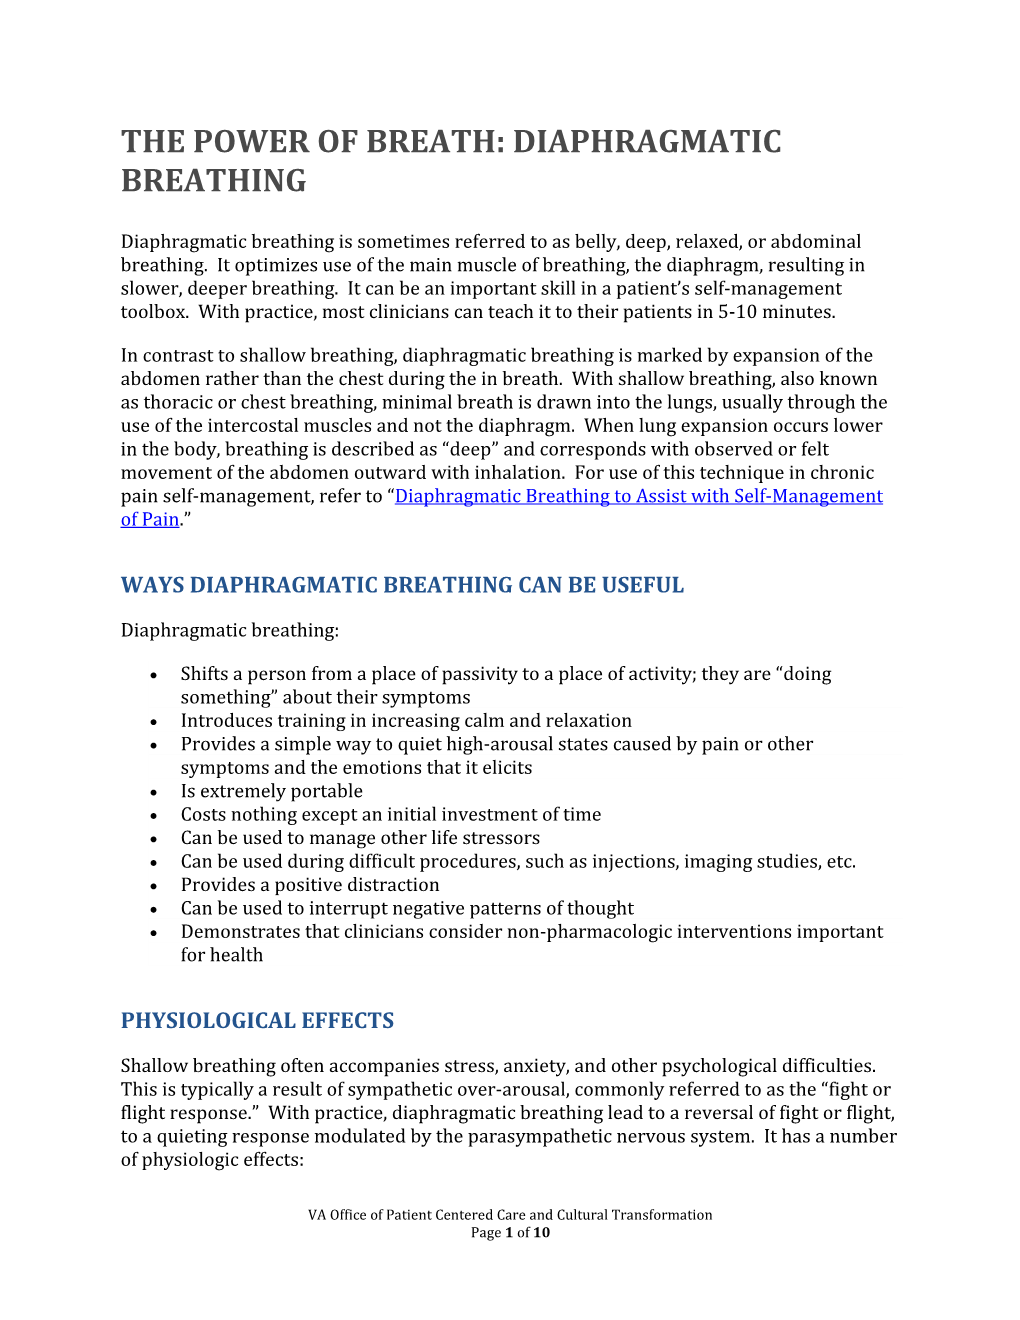 The Power of Breath: Diaphragmatic Breathing